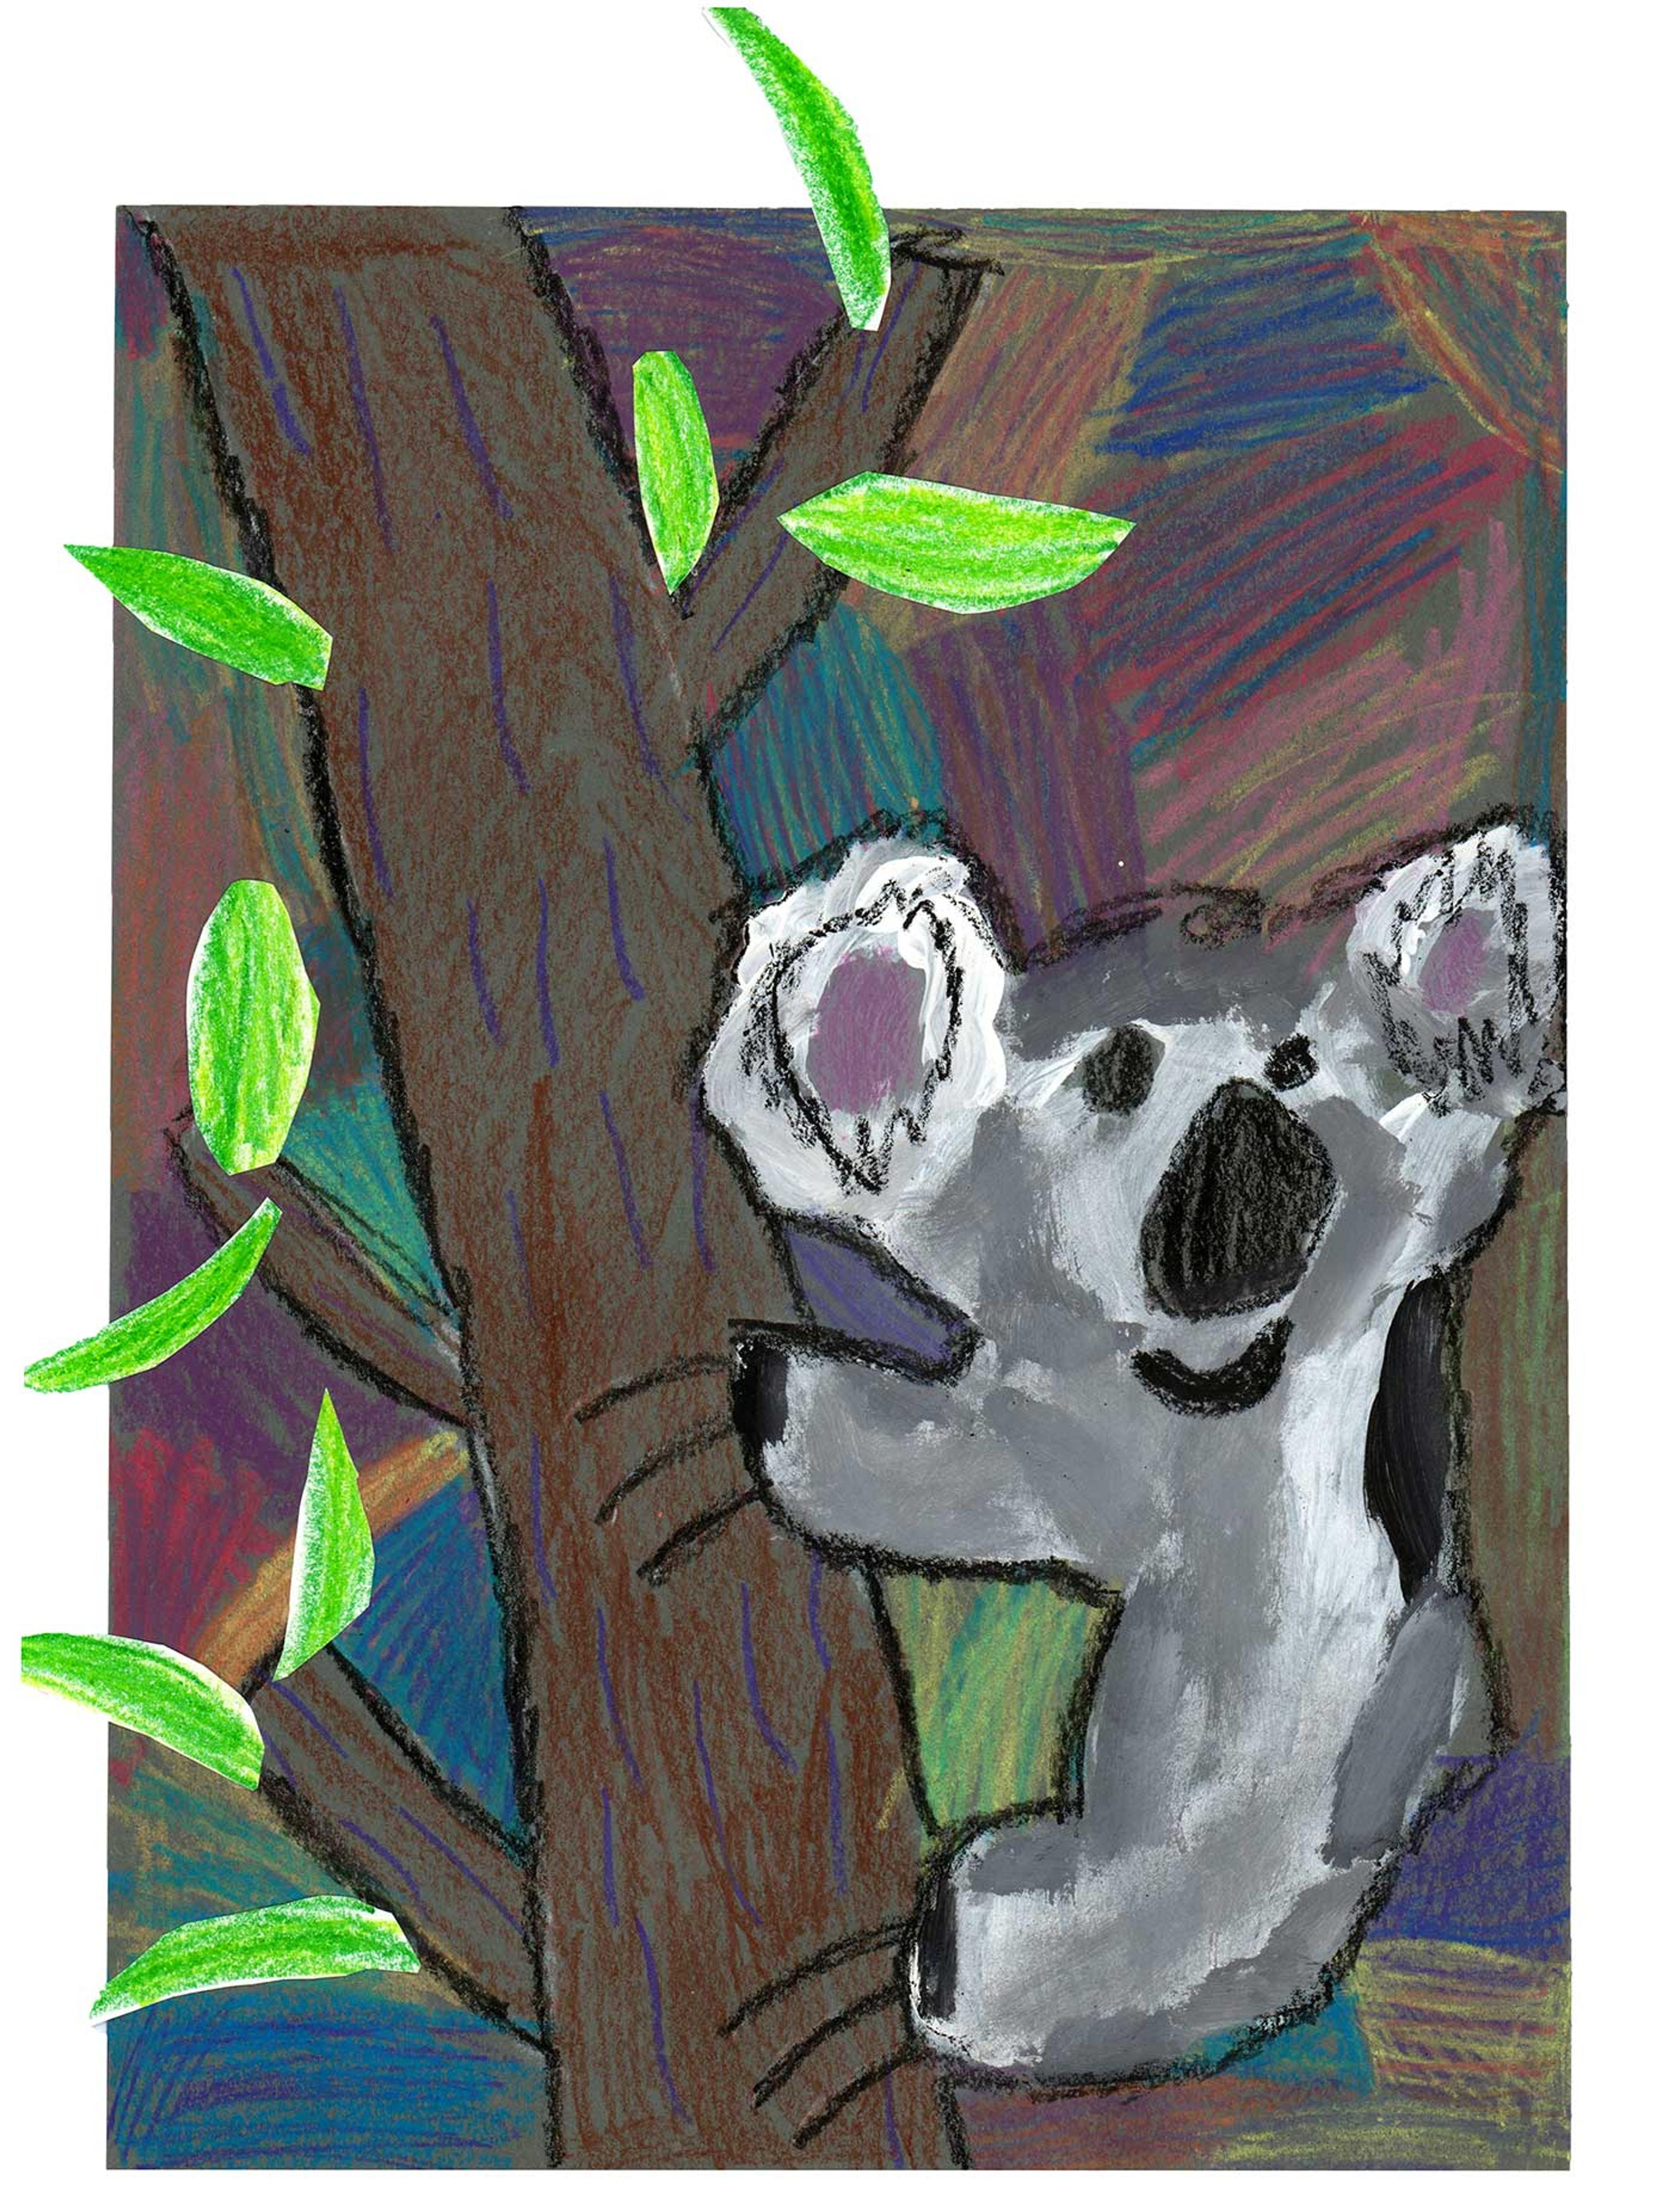 Collage of a koala sitting in a brown tree with green leaves.